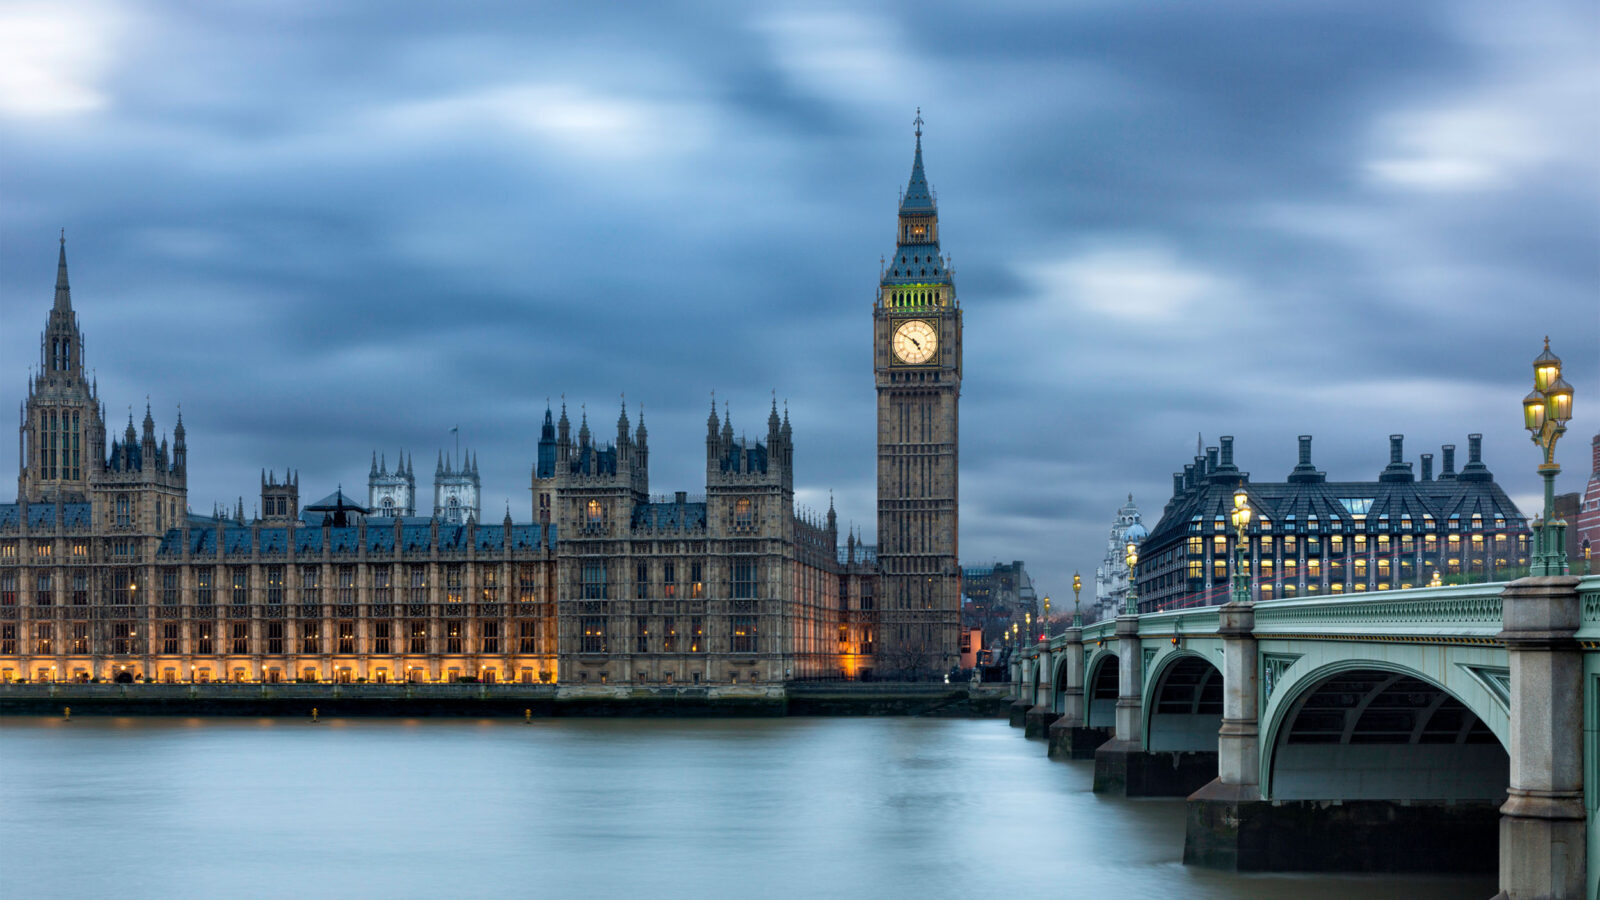 landscape shot of big ben in england on a cloudy day